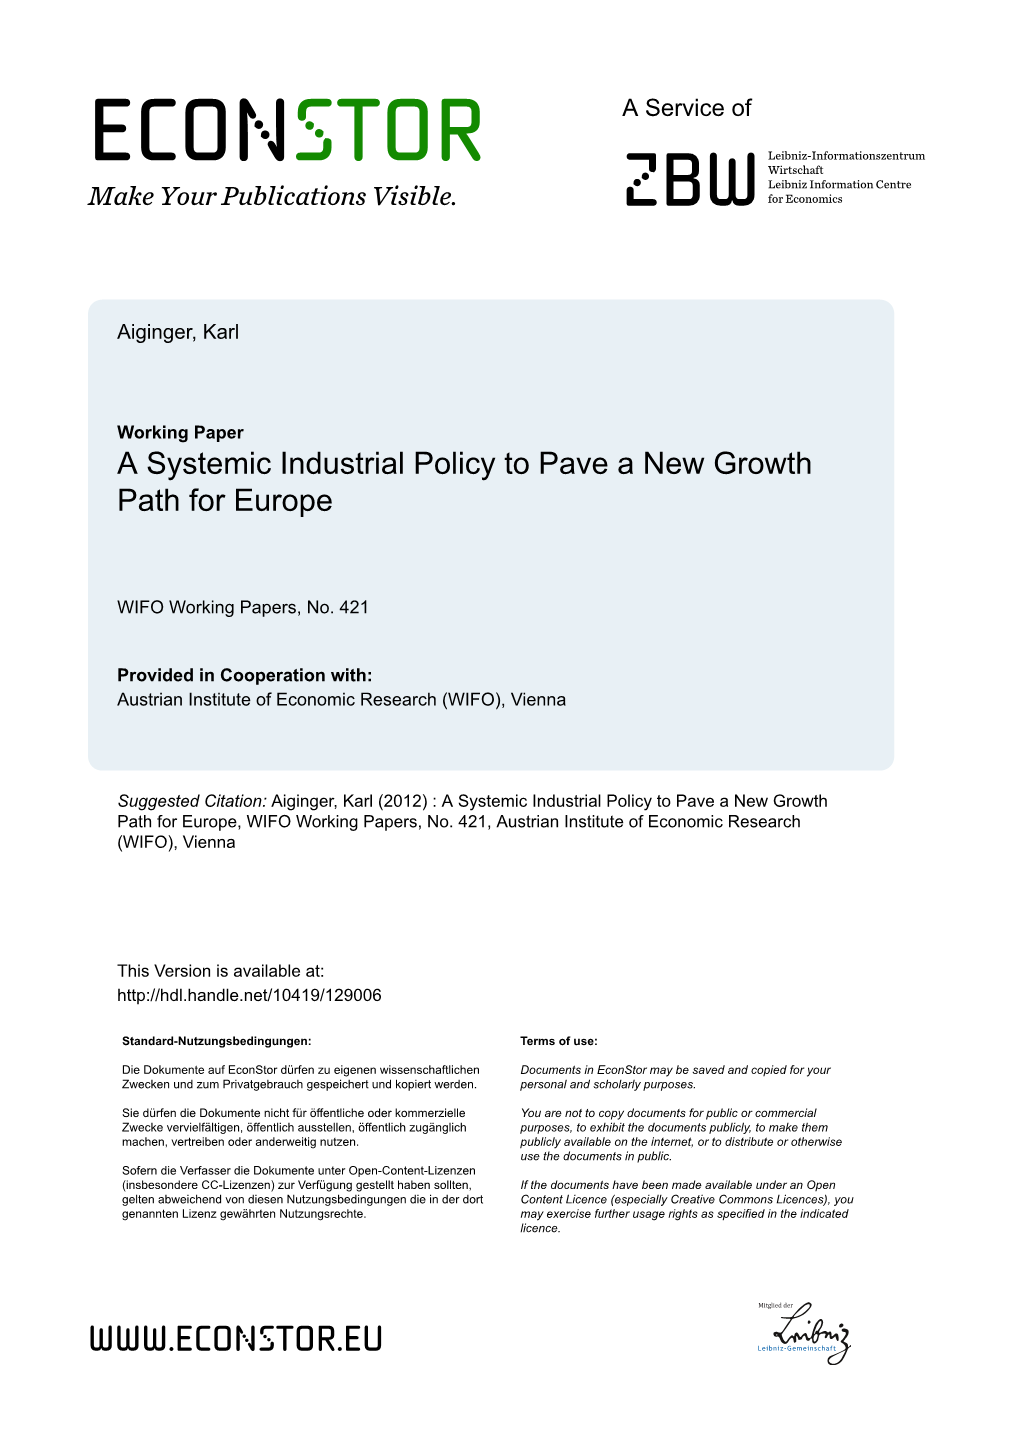 A Systemic Industrial Policy to Pave a New Growth Path for Europe